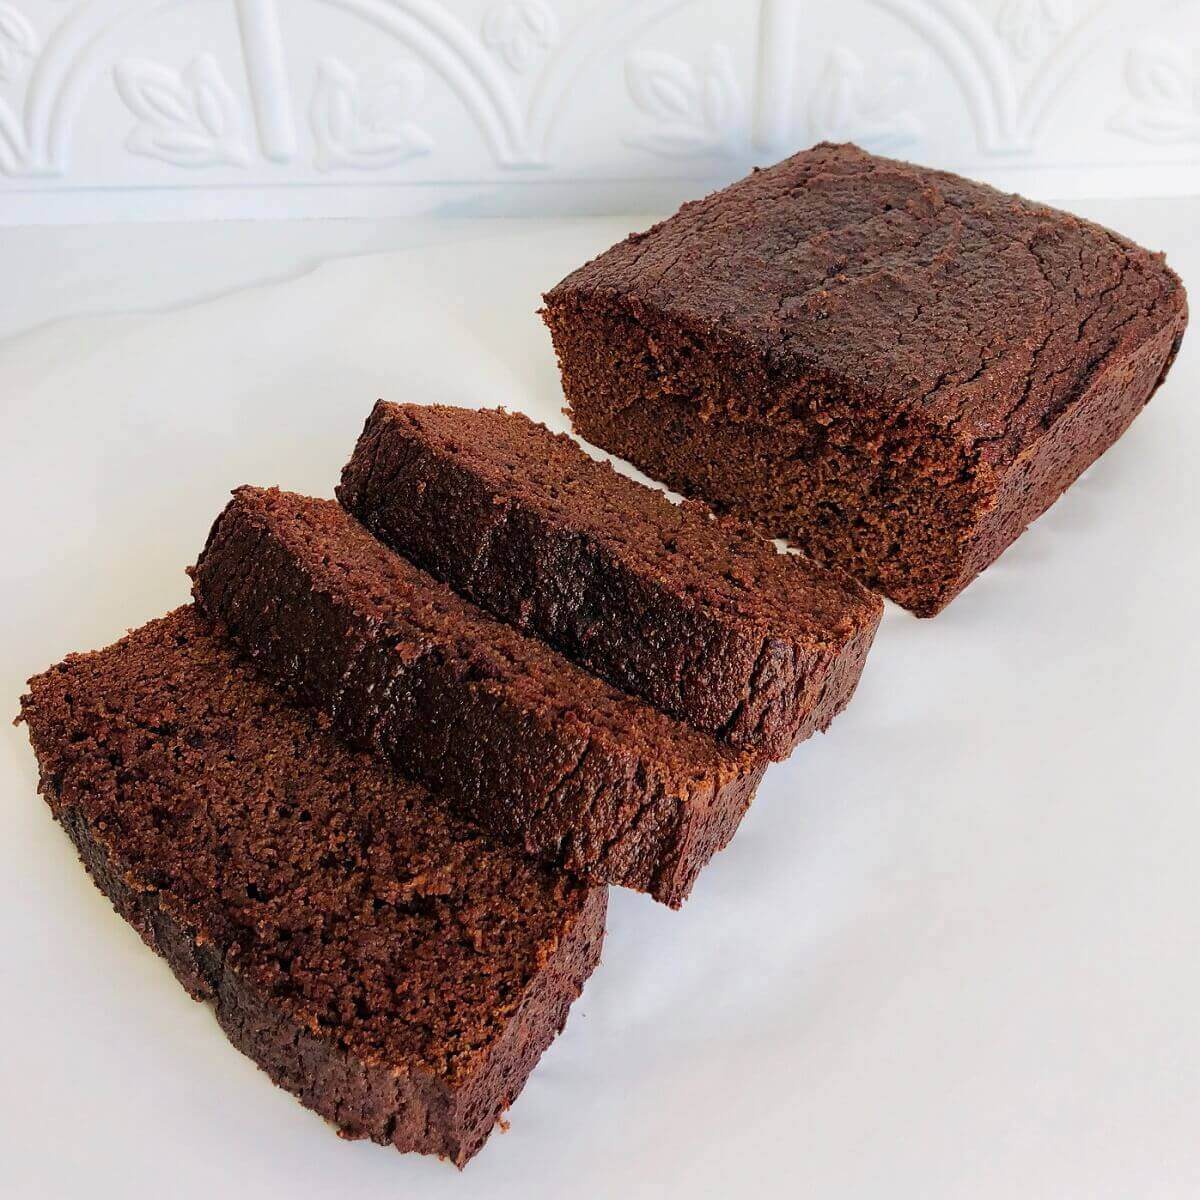 Three slices of coconut flour chocolate cake next to a larger hunk against a white background.